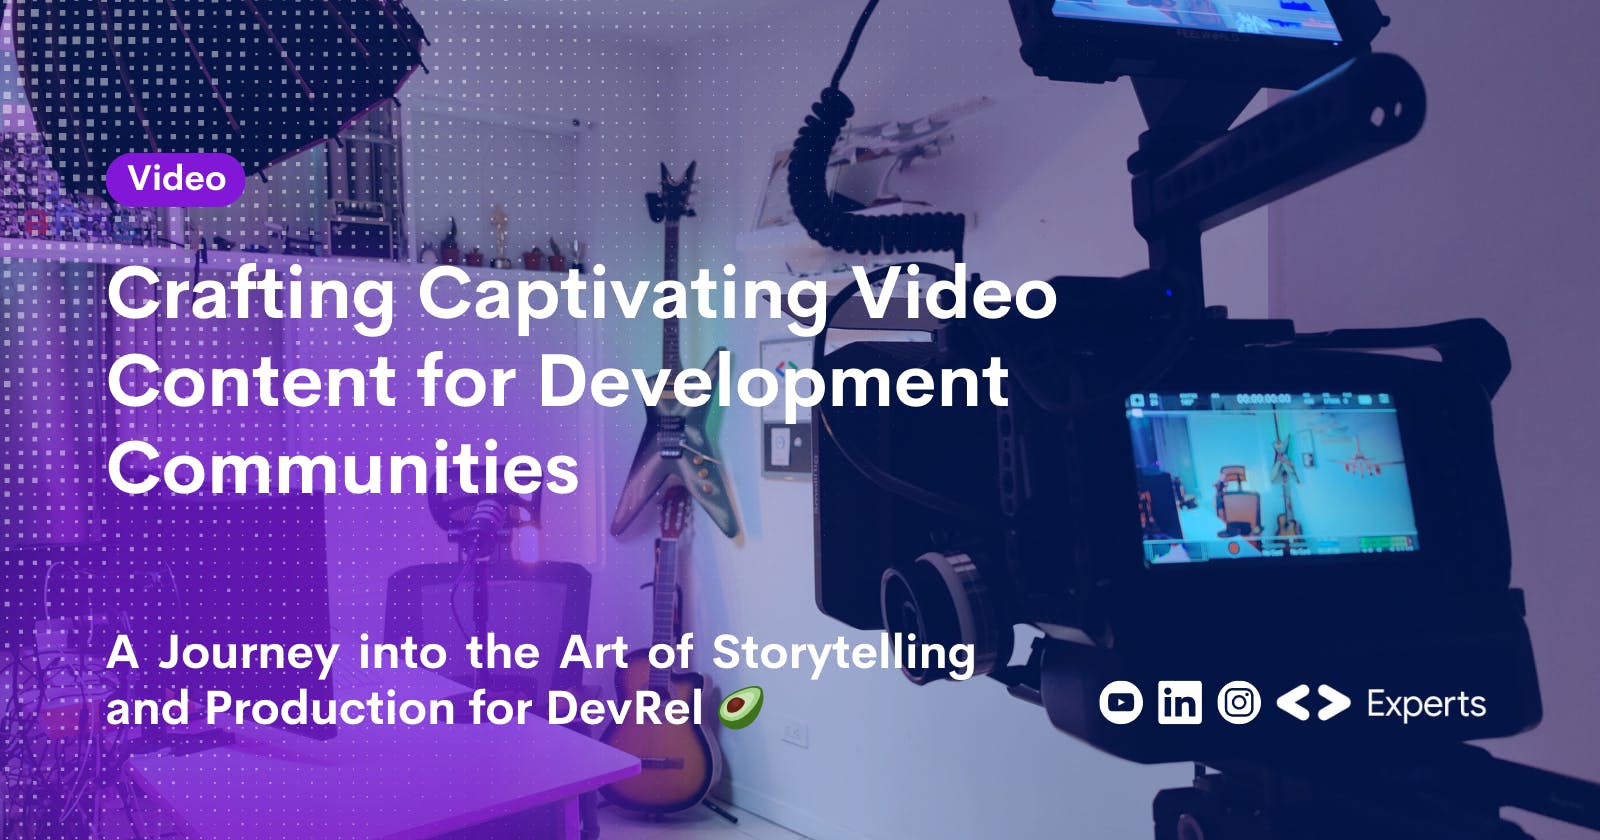 Crafting Captivating Video Content for Development Communities 🥑